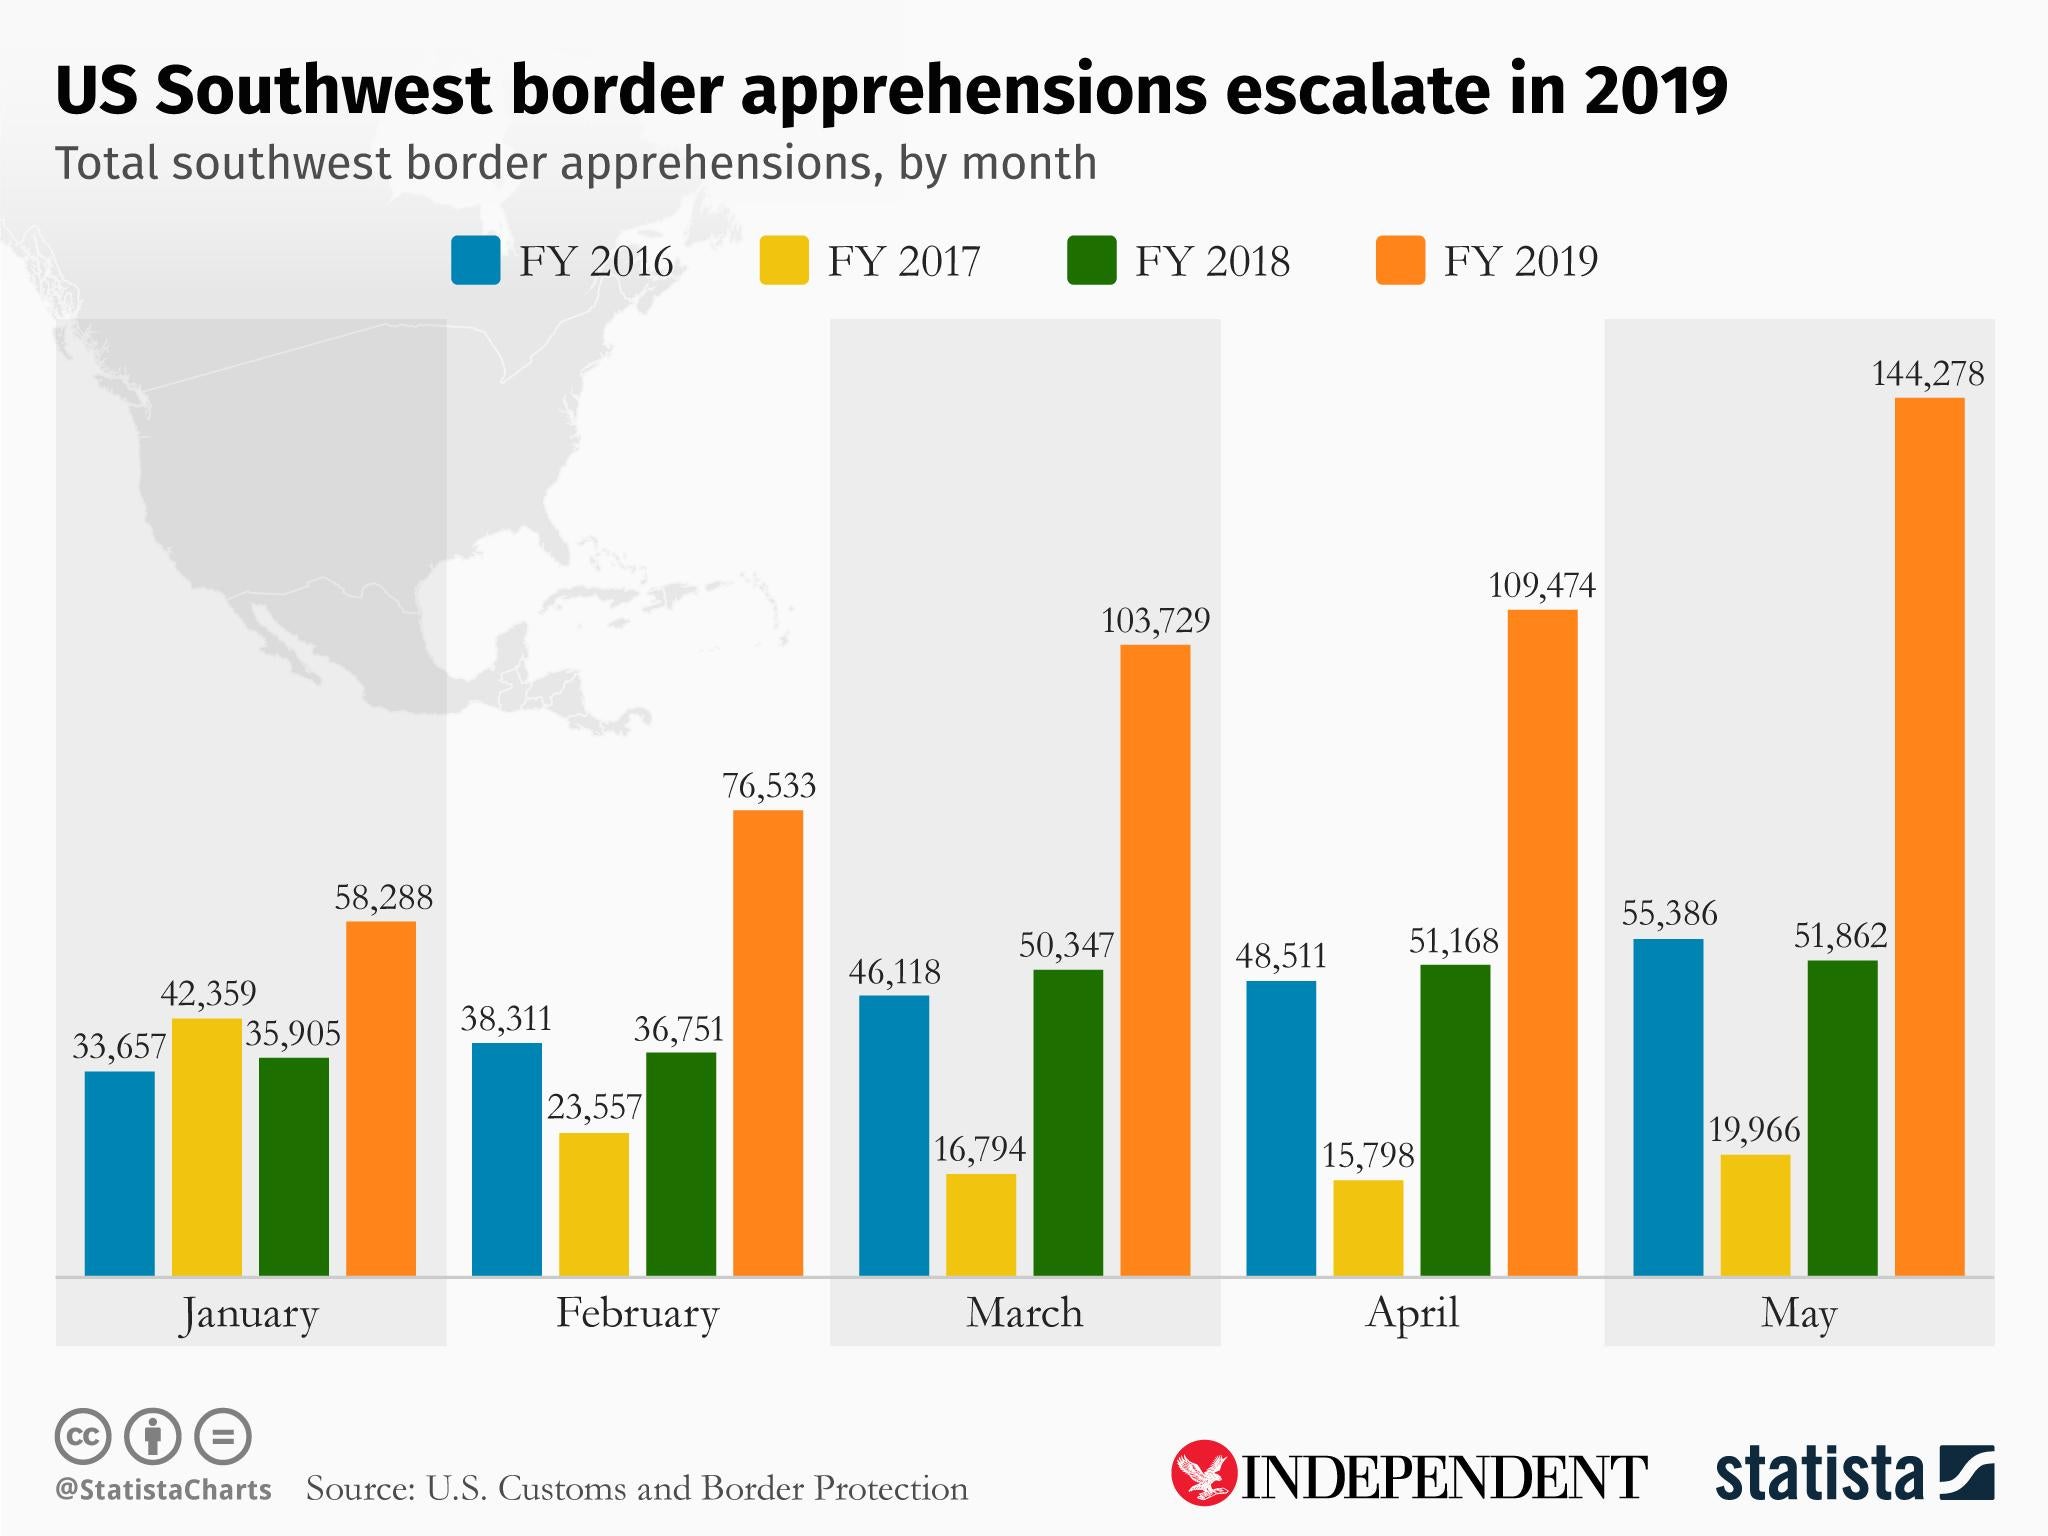 US southwest border apprehensions have escalated in 2019